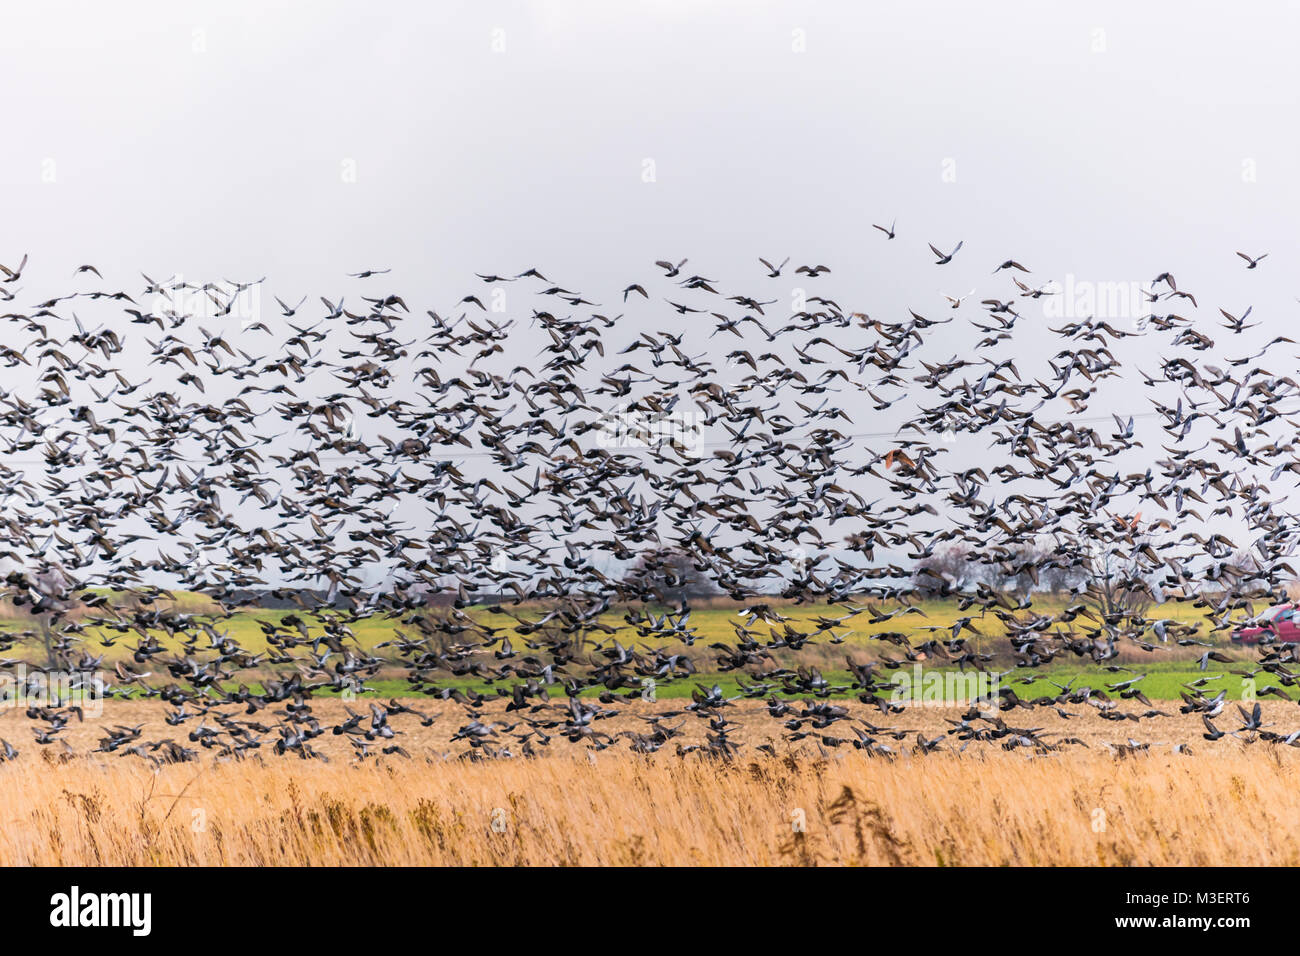 A large flock of birds lands in the field. Many pigeons. Stock Photo